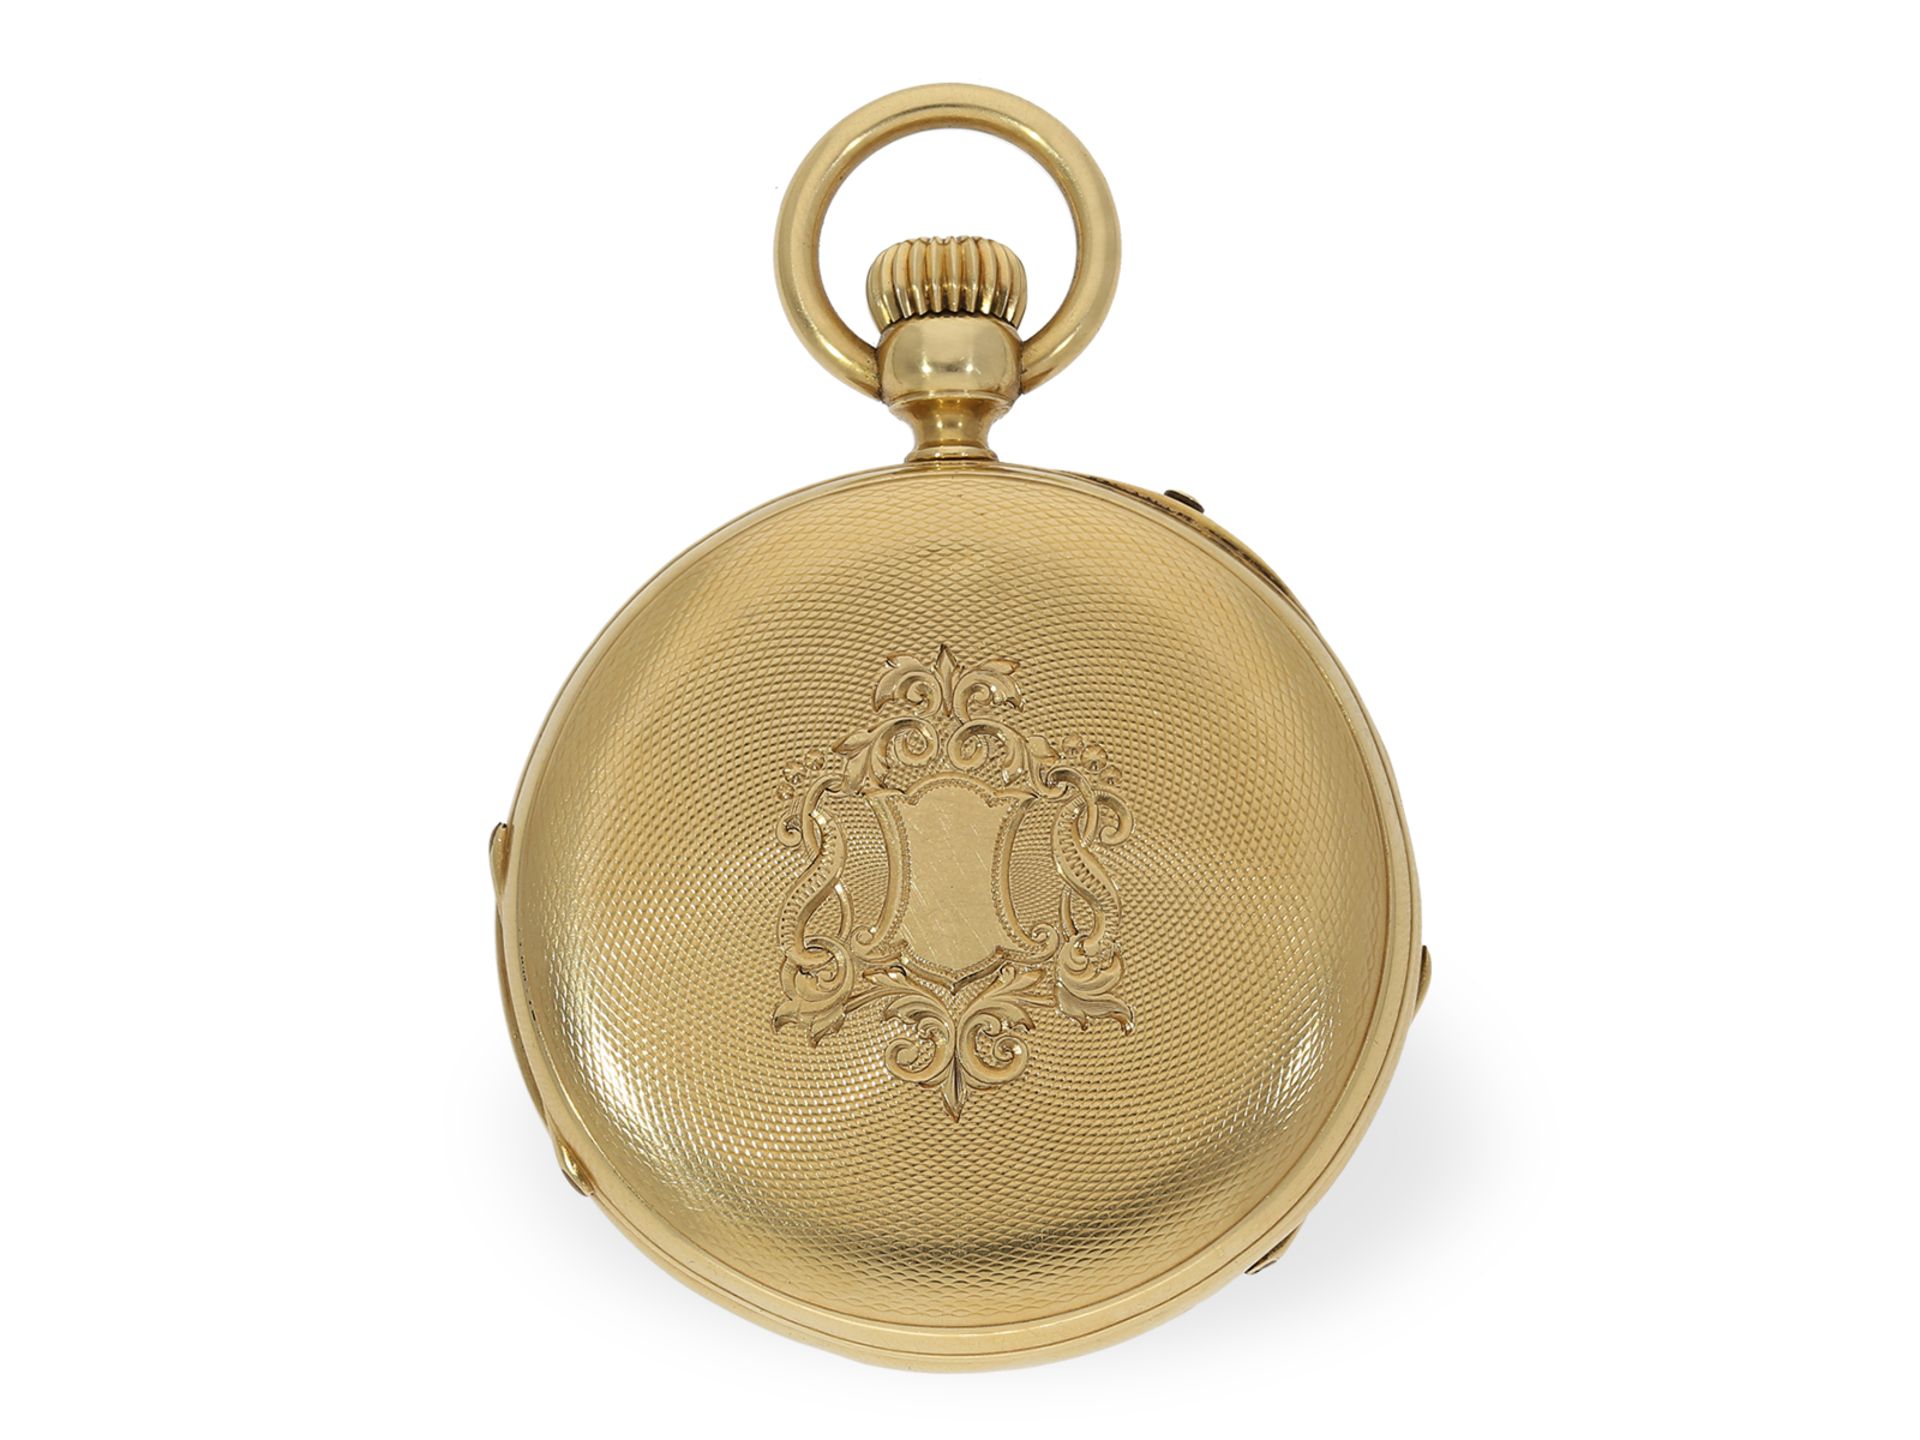 Technically interesting pocket watch with very early crown winding patent, ca. 1850 - Image 6 of 7